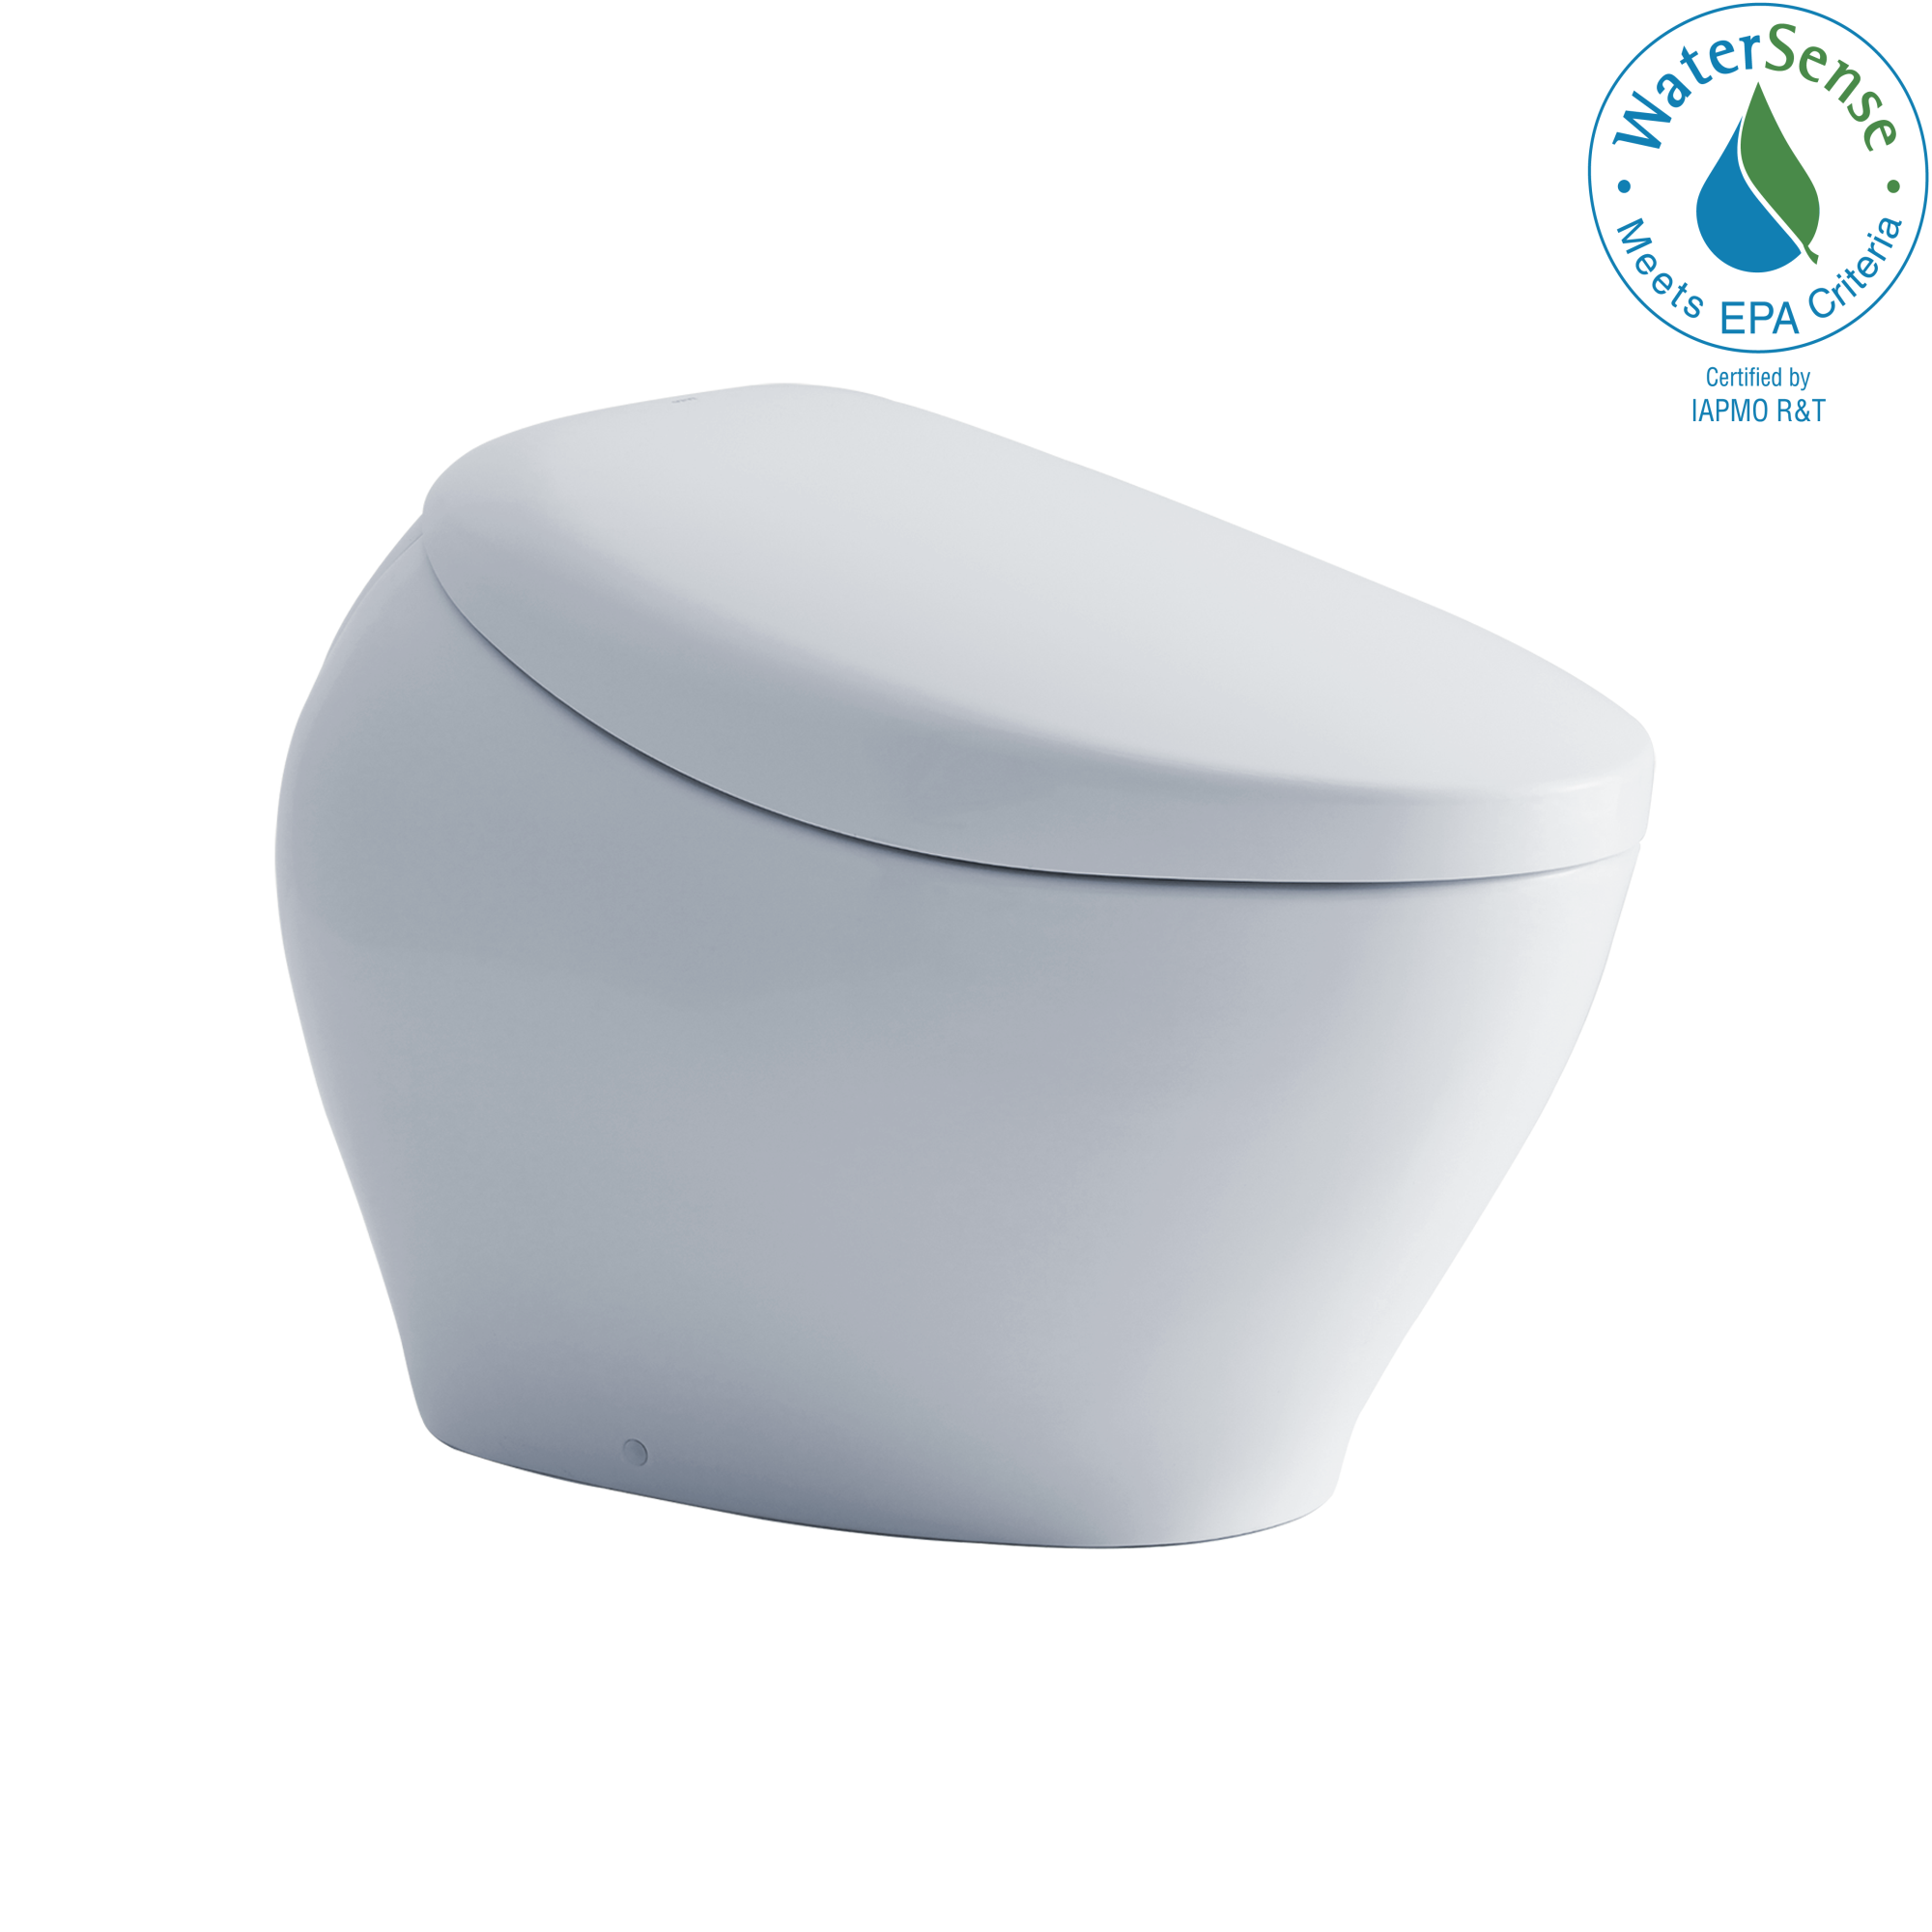 TOTO TOTO NEOREST NX1 Dual Flush 1.0 or 0.8 GPF Toilet with Integrated Bidet Seat, EWATER+ - Cotton White - MS902CUMFG-01 -  MS902CUMFG#01